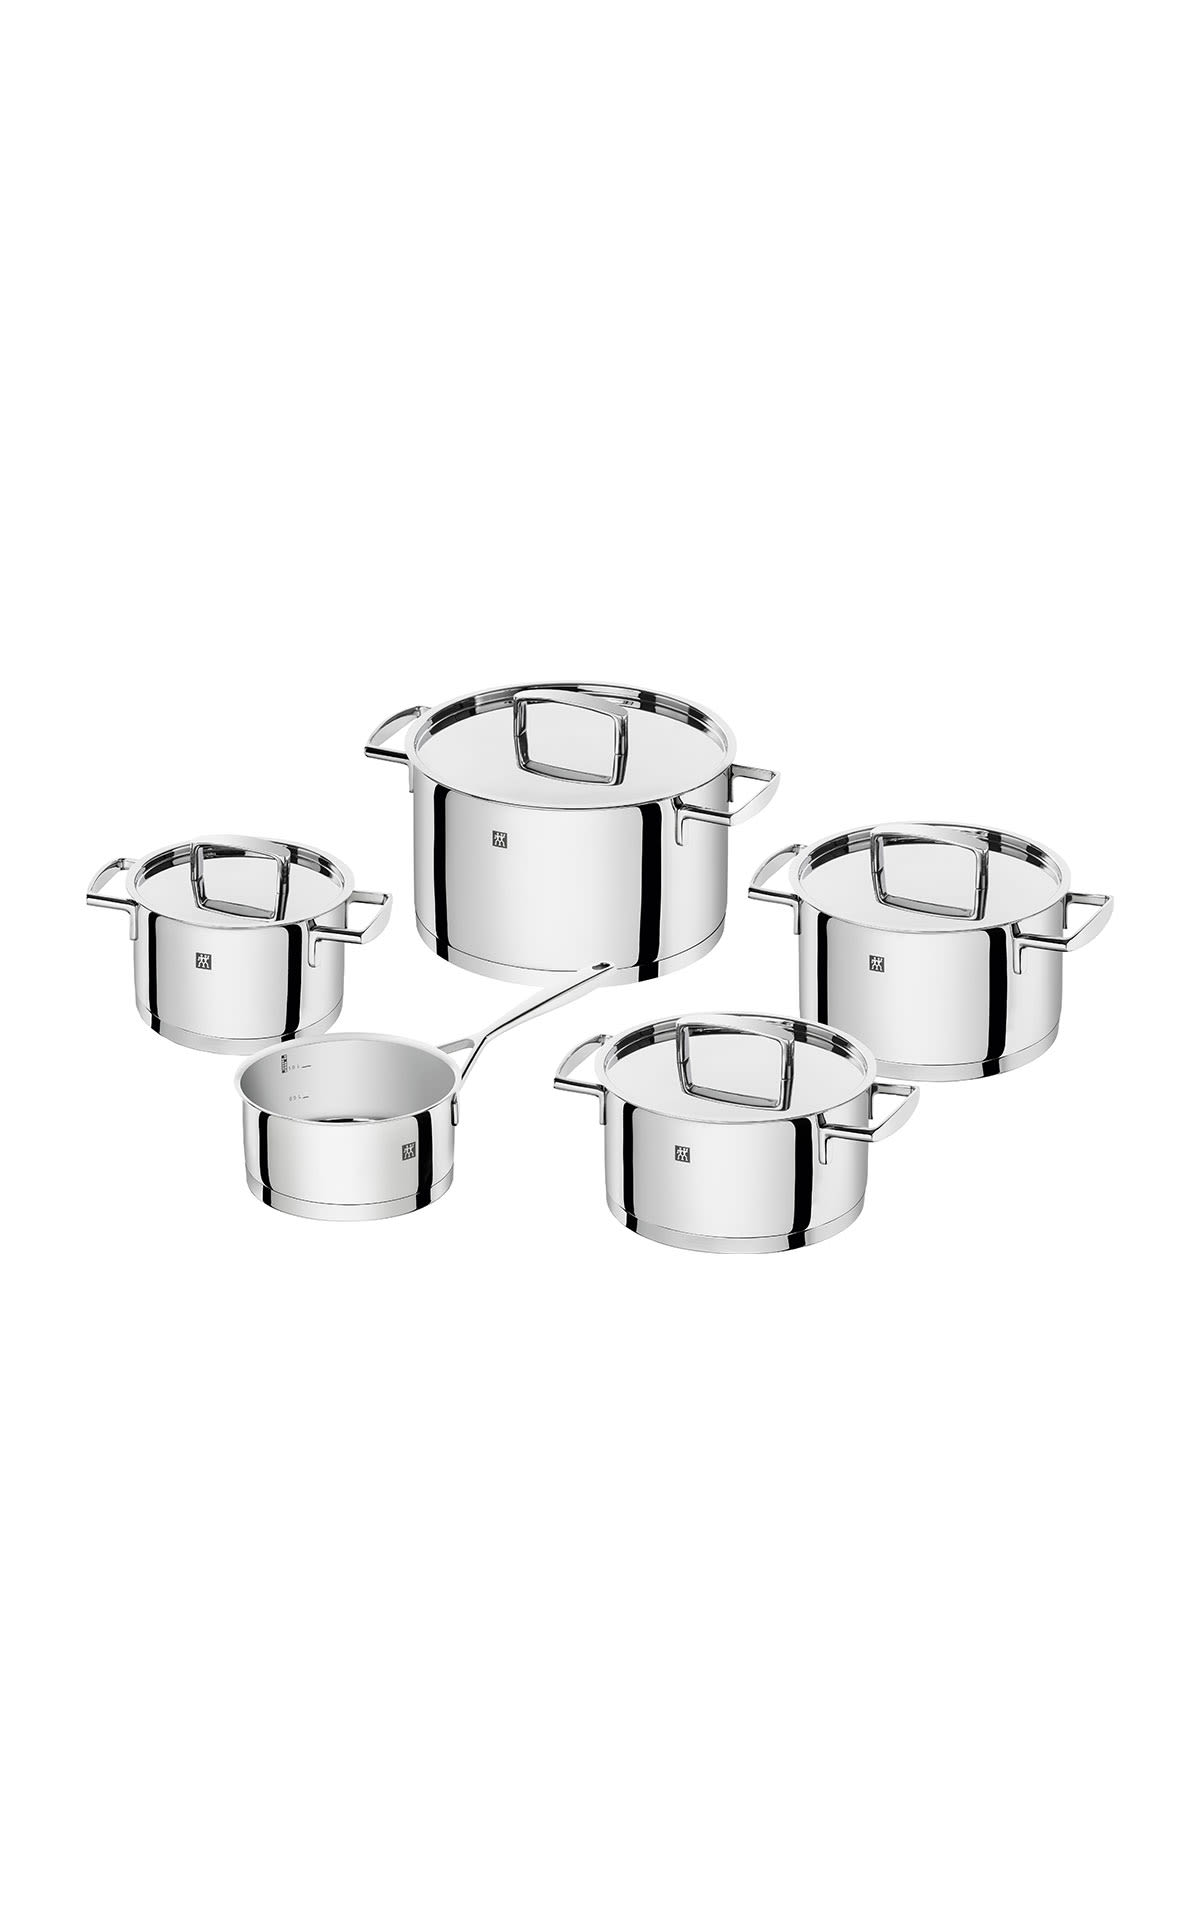 Zwilling Passion cookware set 5pc  from Bicester Village